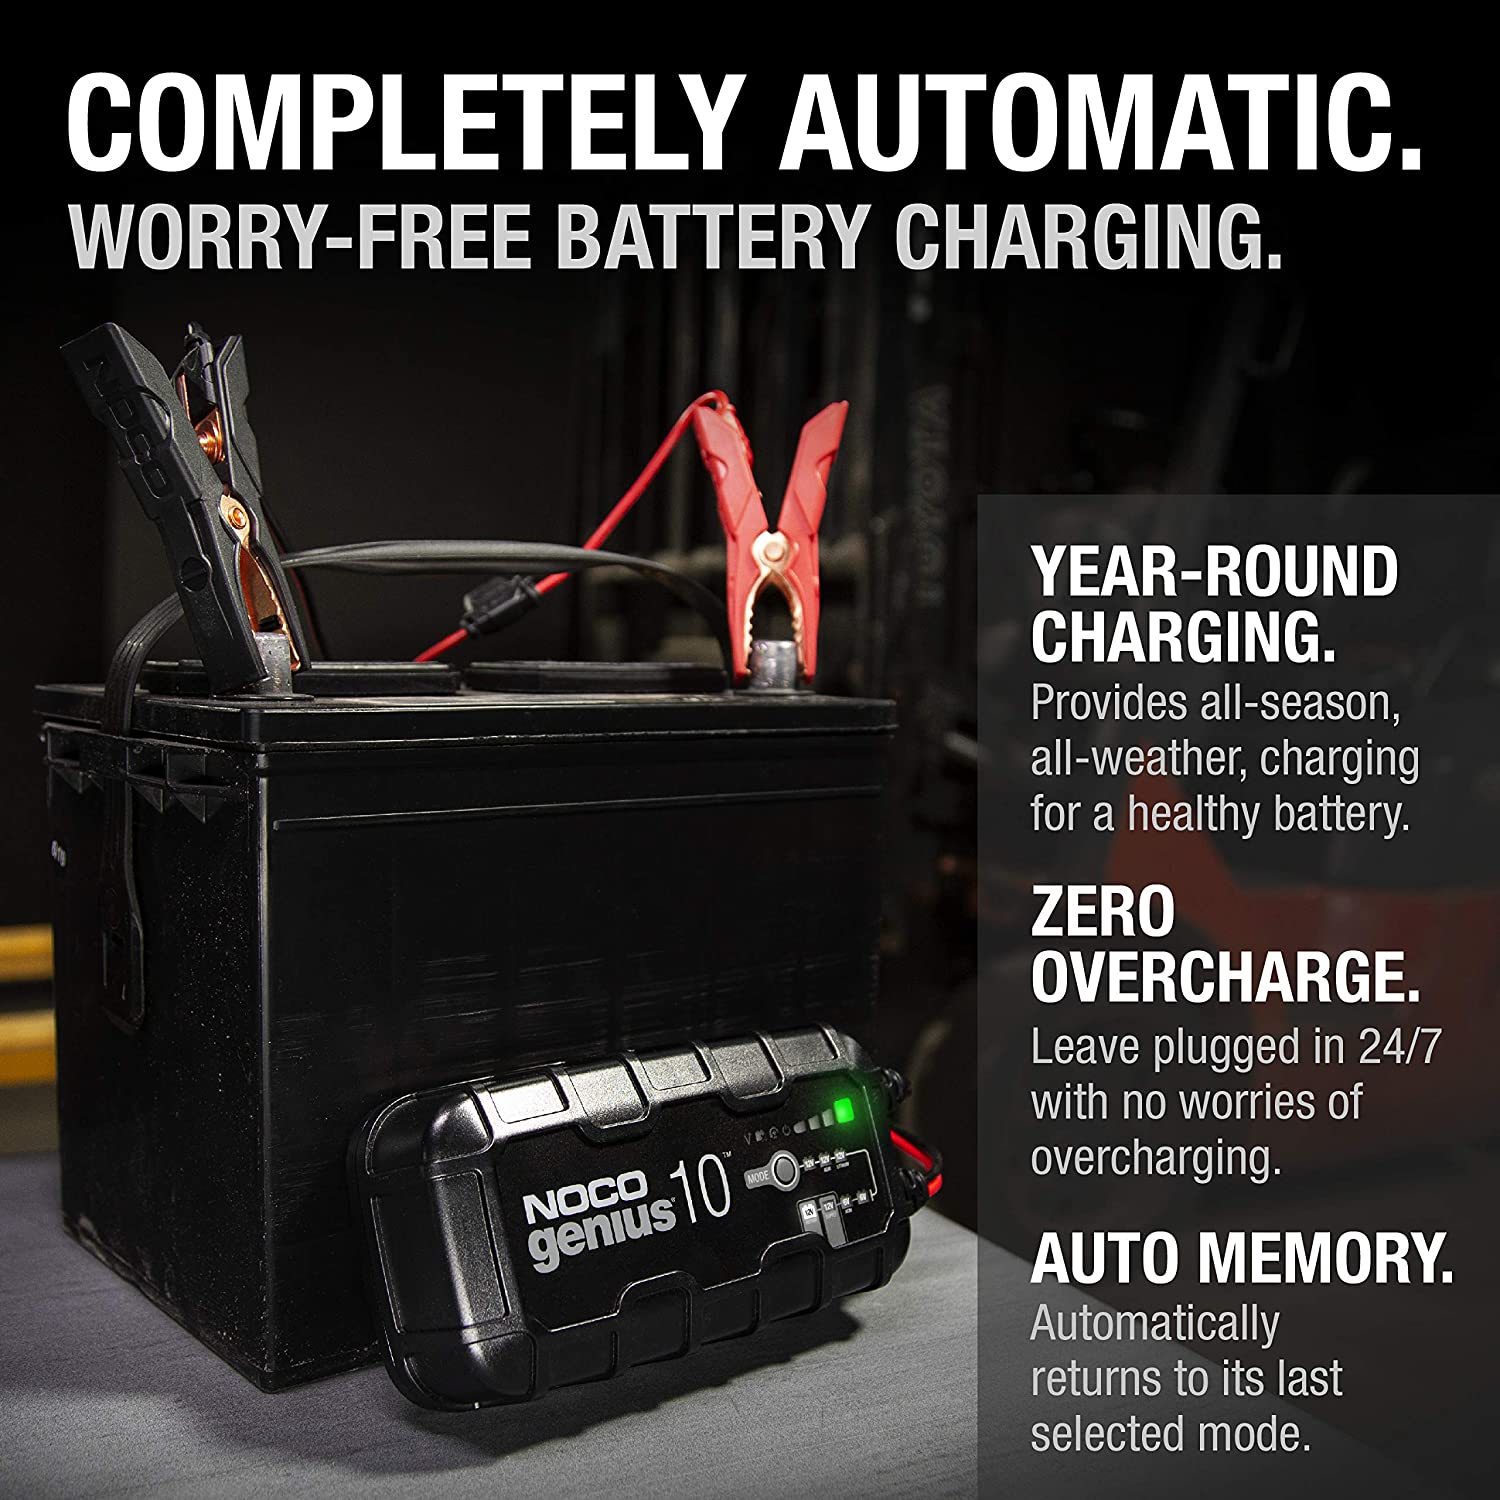 NOCO GENIUS10, 10-Amp Fully-Automatic Smart Charger, 6V And 12V Battery Charger, Battery Maintainer, Trickle Charger, And Battery Desulfator With Temperature Compensation